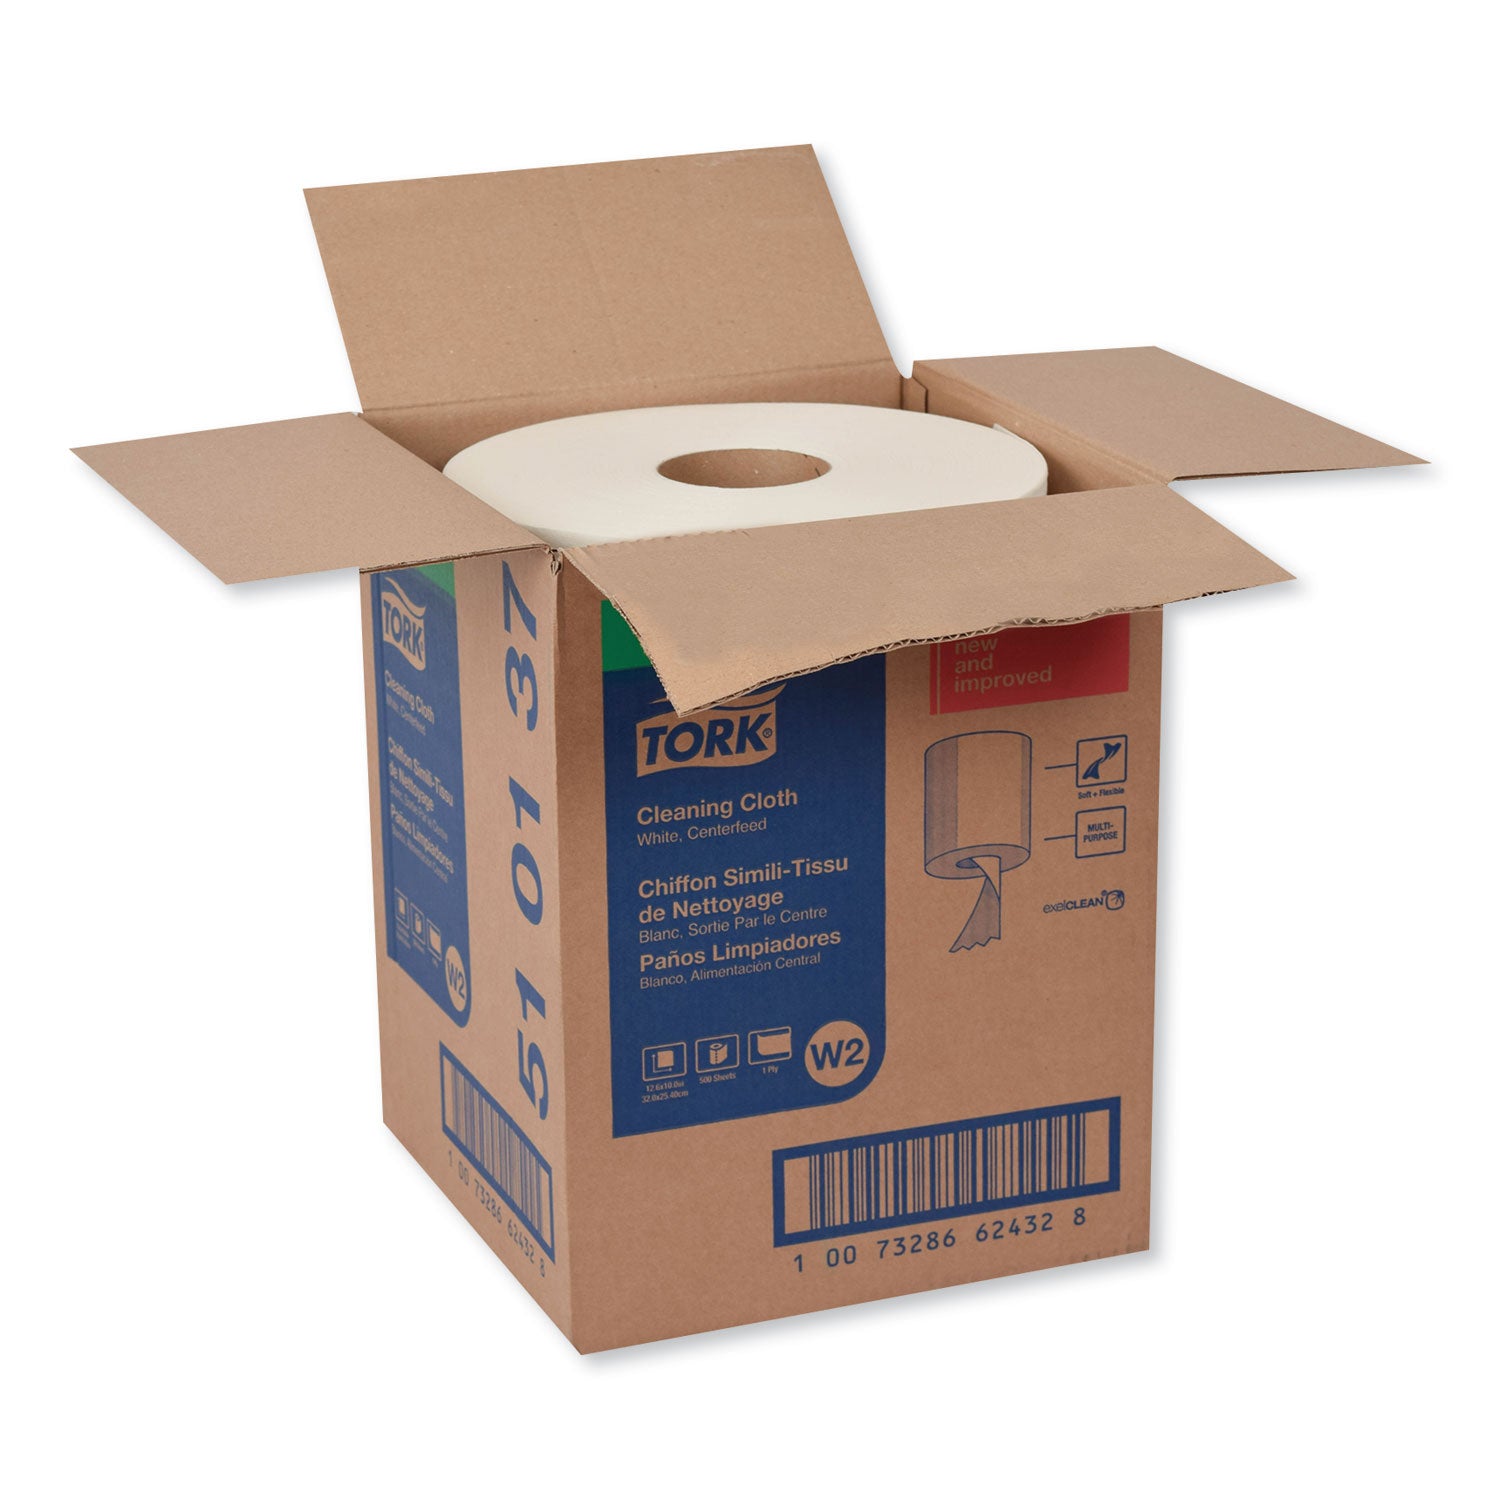 cleaning-cloth-126-x-10-white-500-wipes-carton_trk510137 - 3